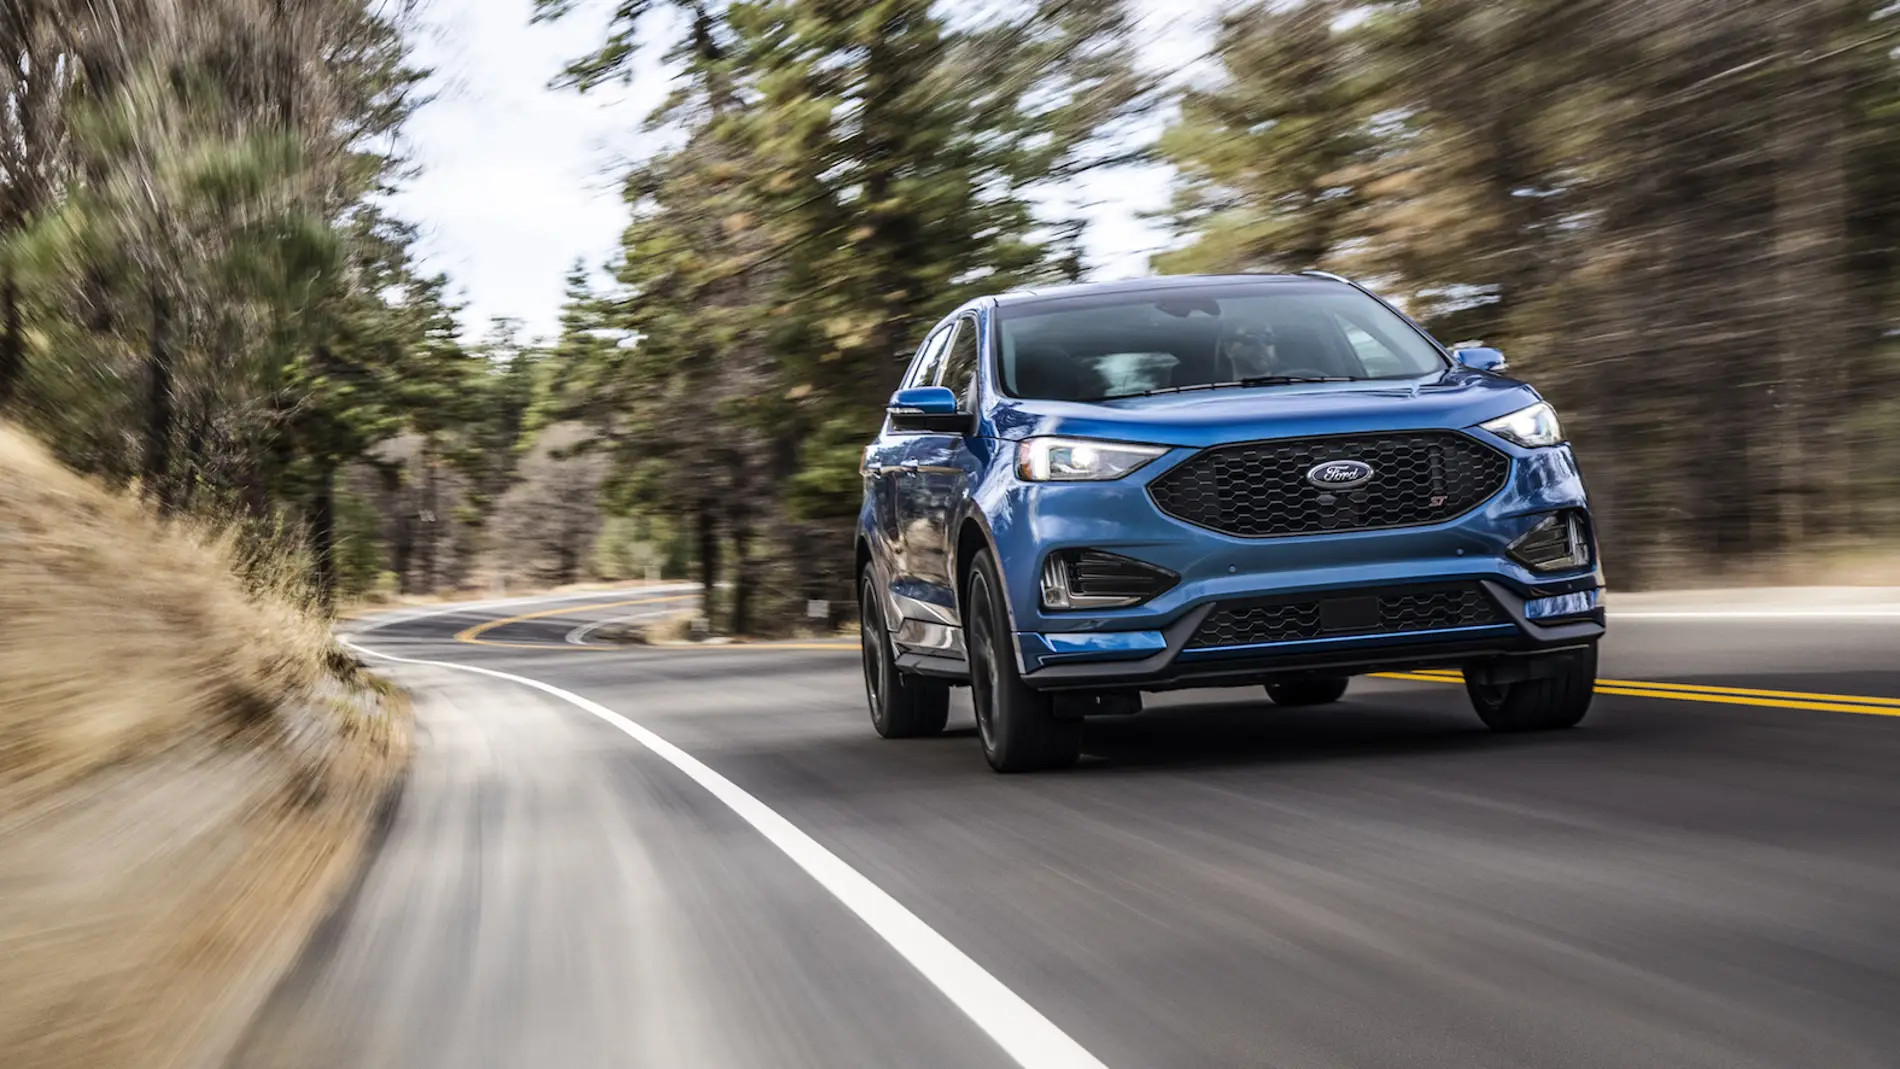 2019-ford-edge-st-photos-and-full-info-news-car-and-driver-photo-699972-s-original.jpg